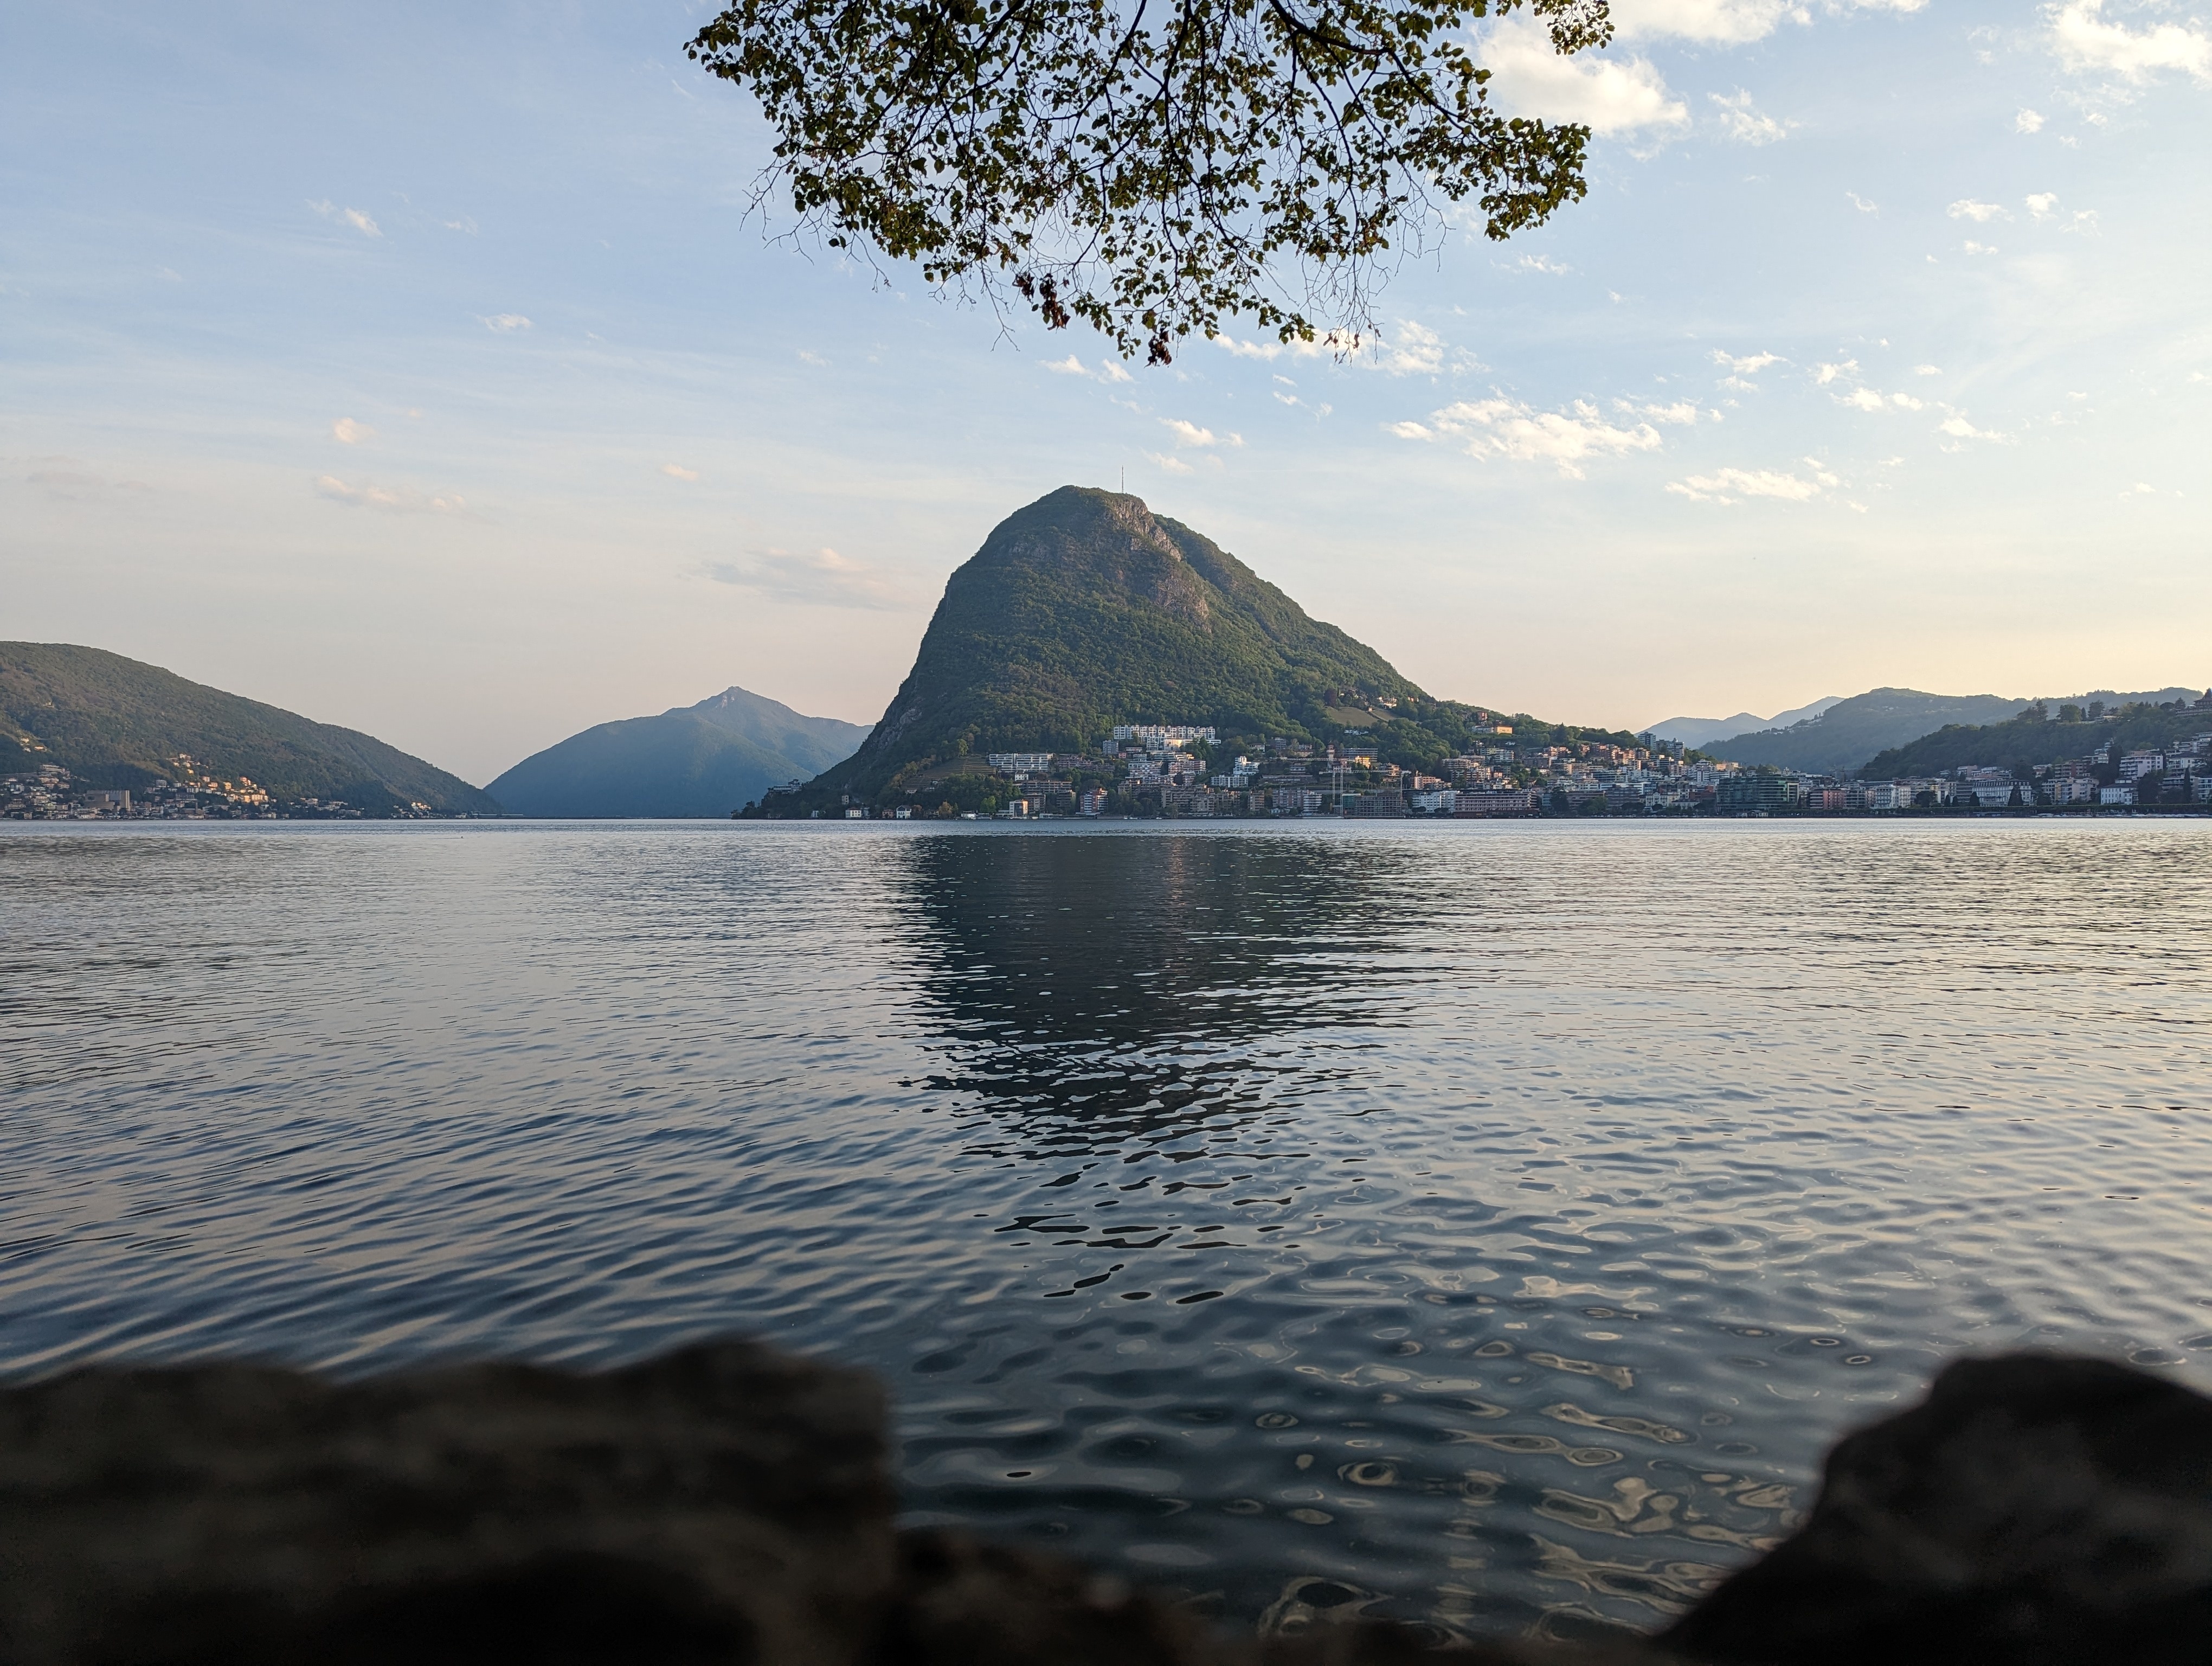 San Salvatore from shores of Lugano